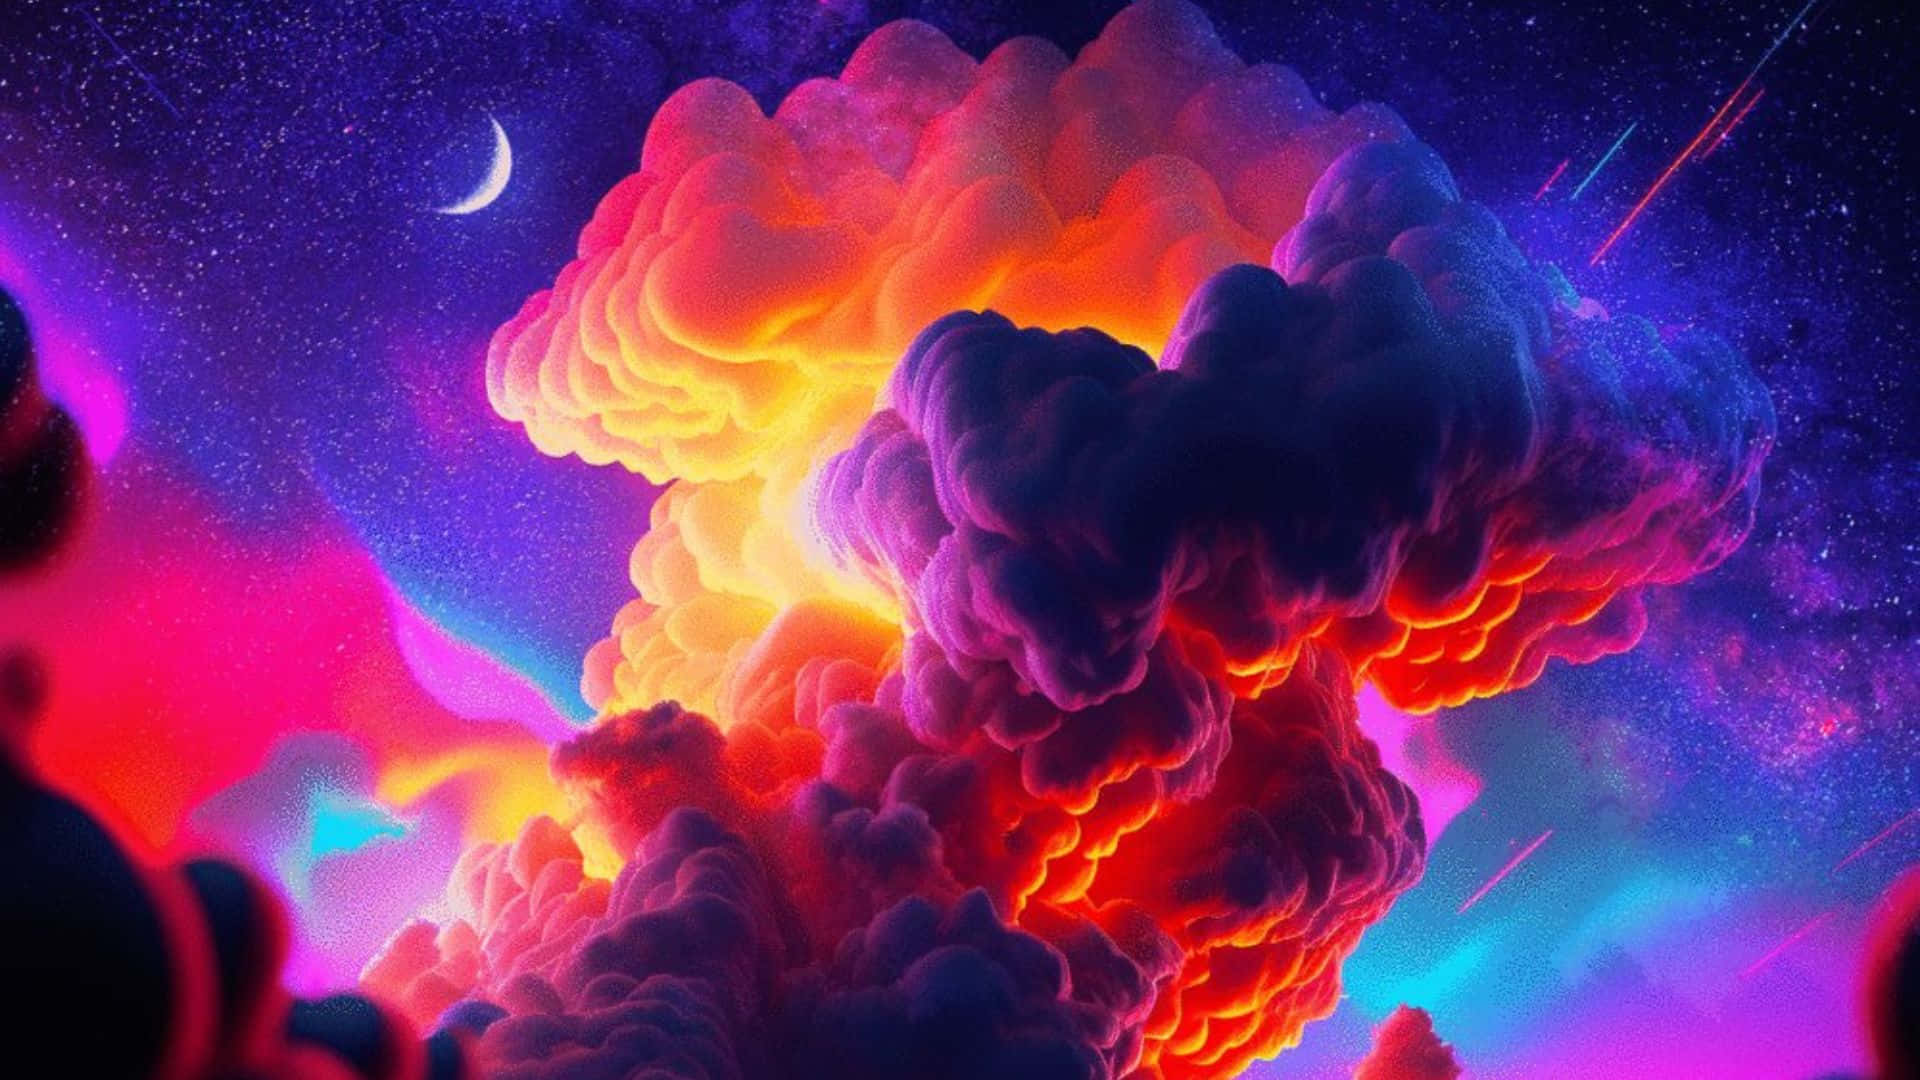 Surreal Trippy Sky with Vibrant Colors Wallpaper